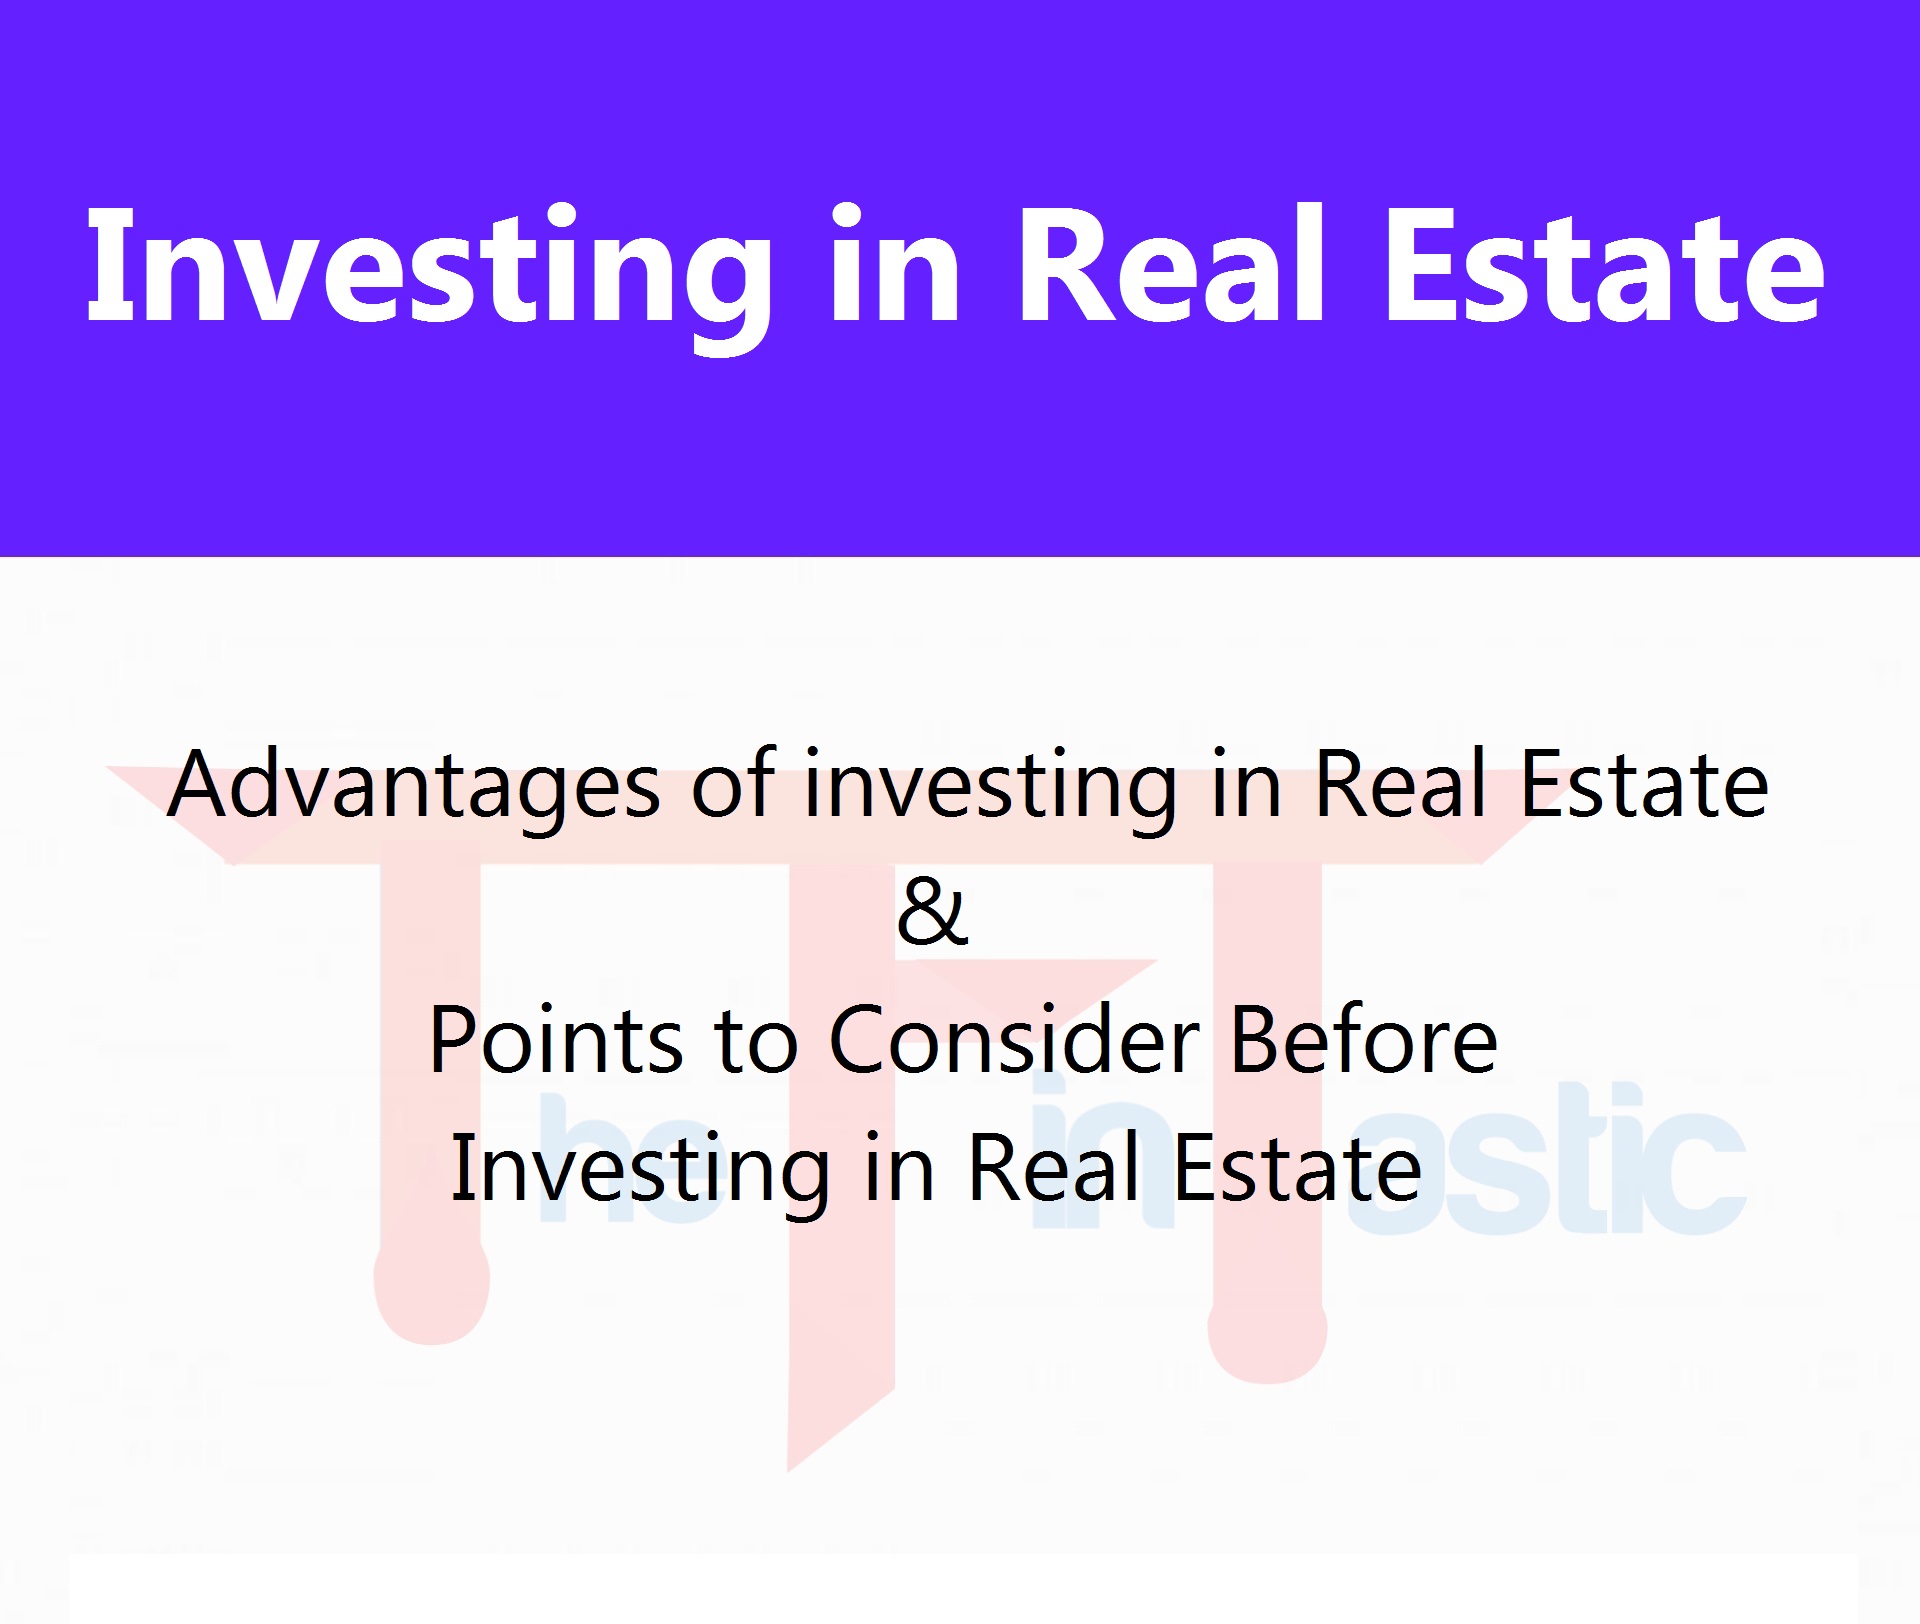 Investing in Real Estate - Advantages and Points to consider before investing